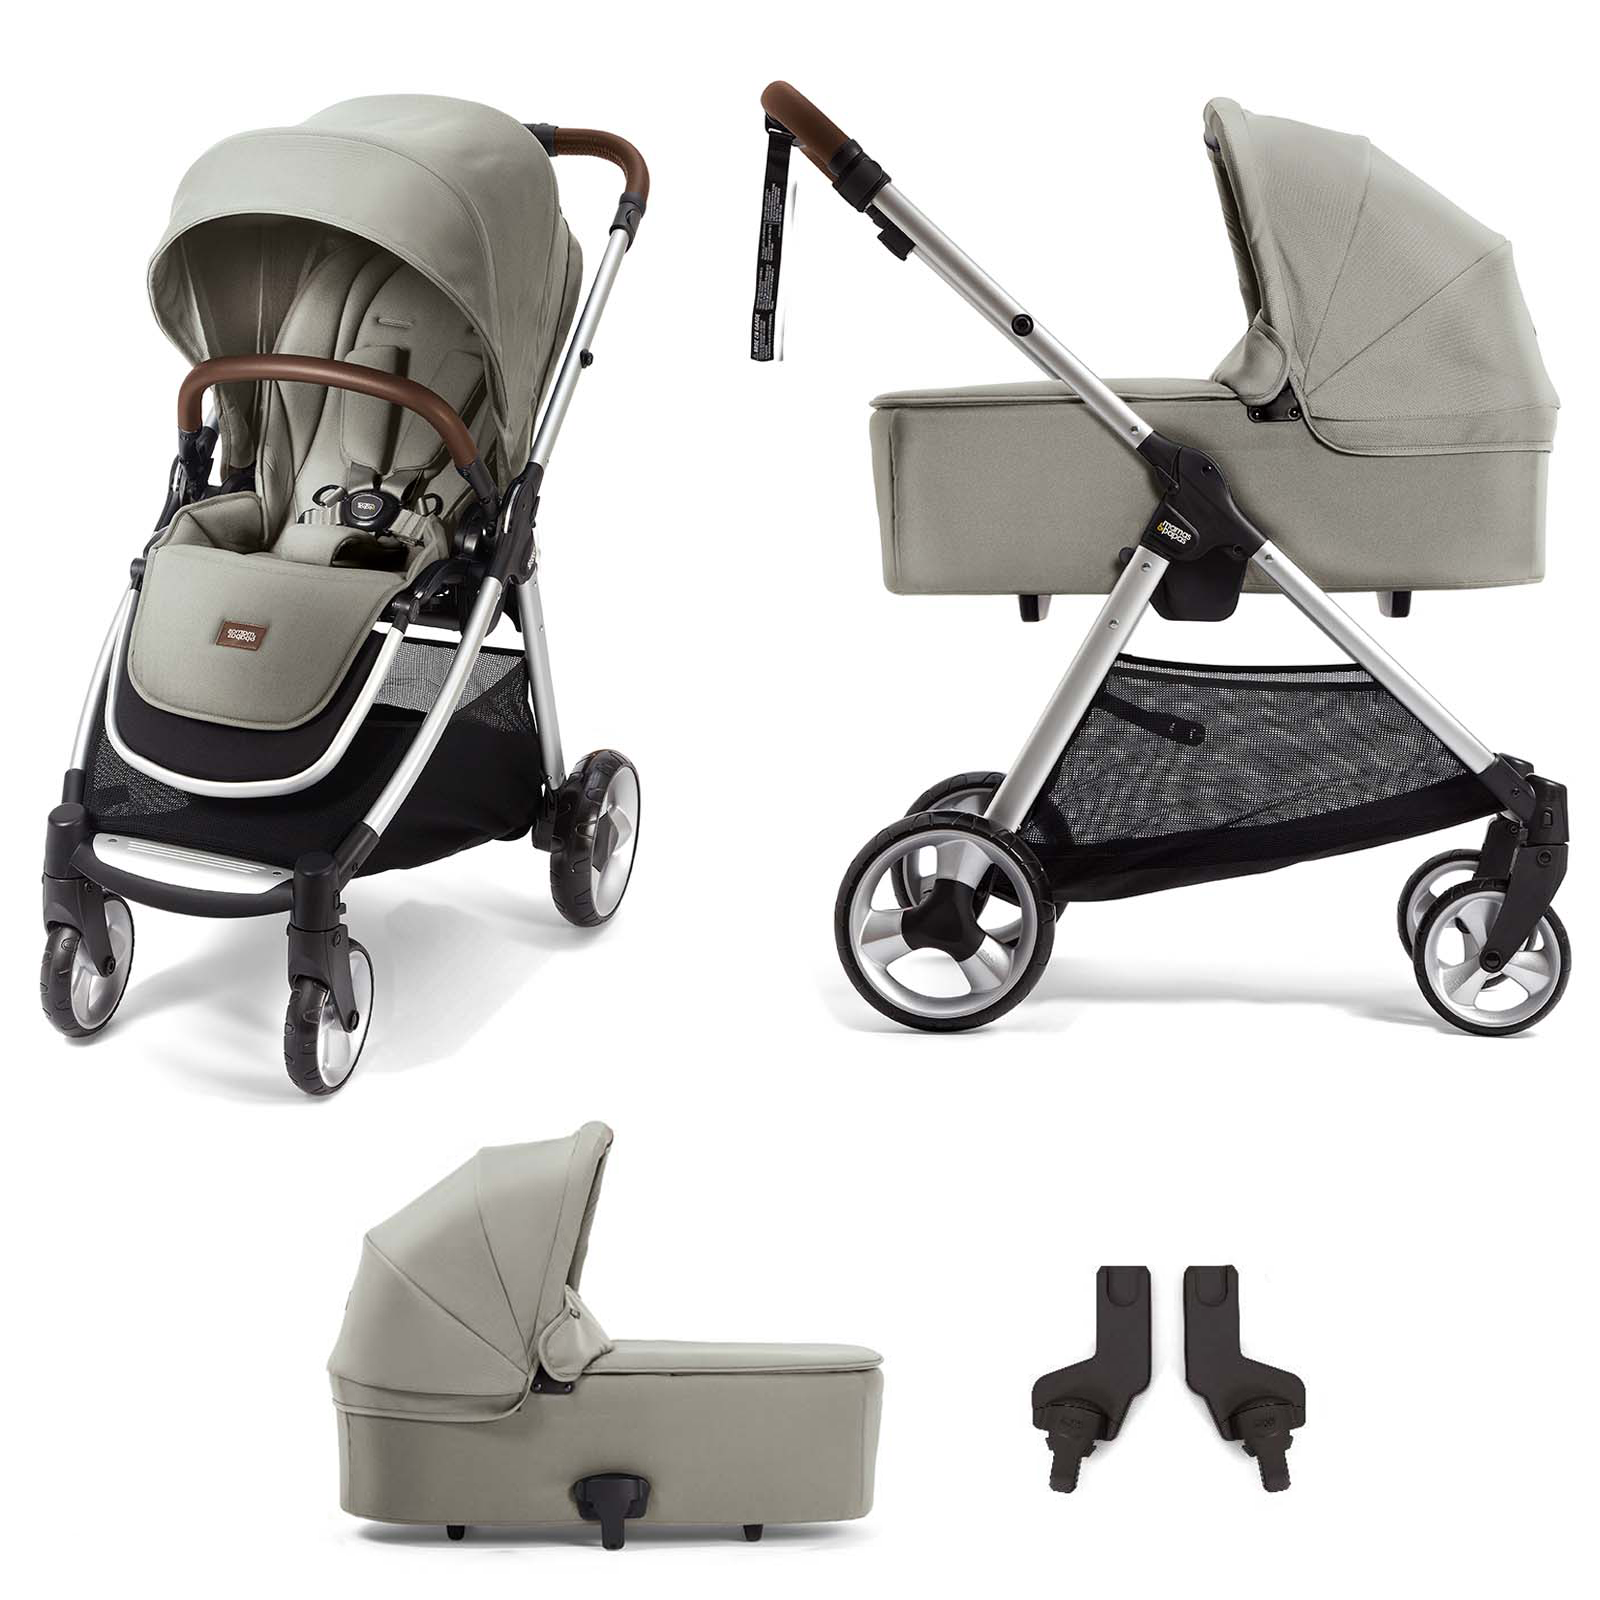 Mamas & Papas Flip XT2 2in1 Pushchair Stroller with Carrycot - Sage Green